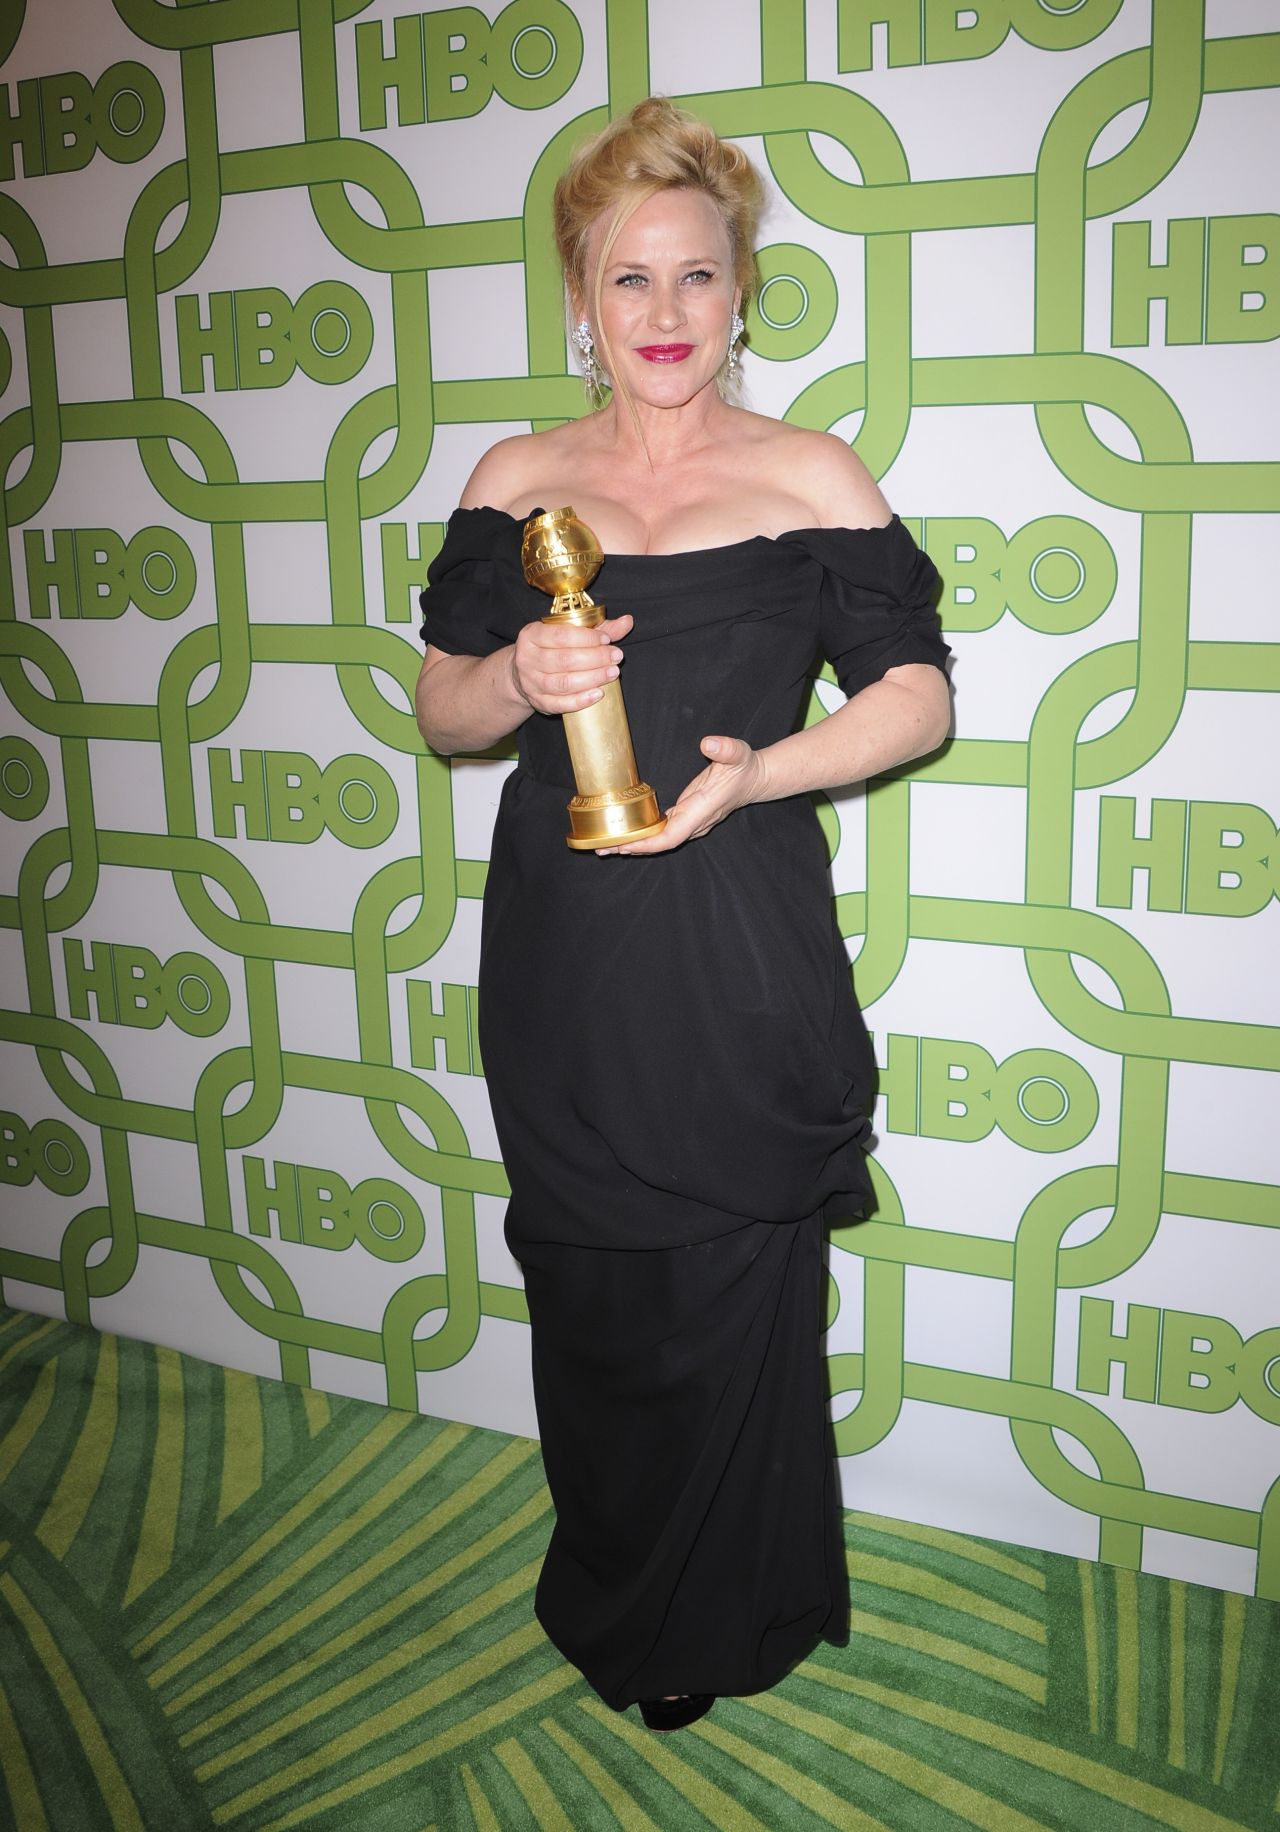 https://celebmafia.com/wp-content/uploads/2019/01/patricia-arquette-2019-hbo-official-golden-globe-awards-after-party-0.jpg